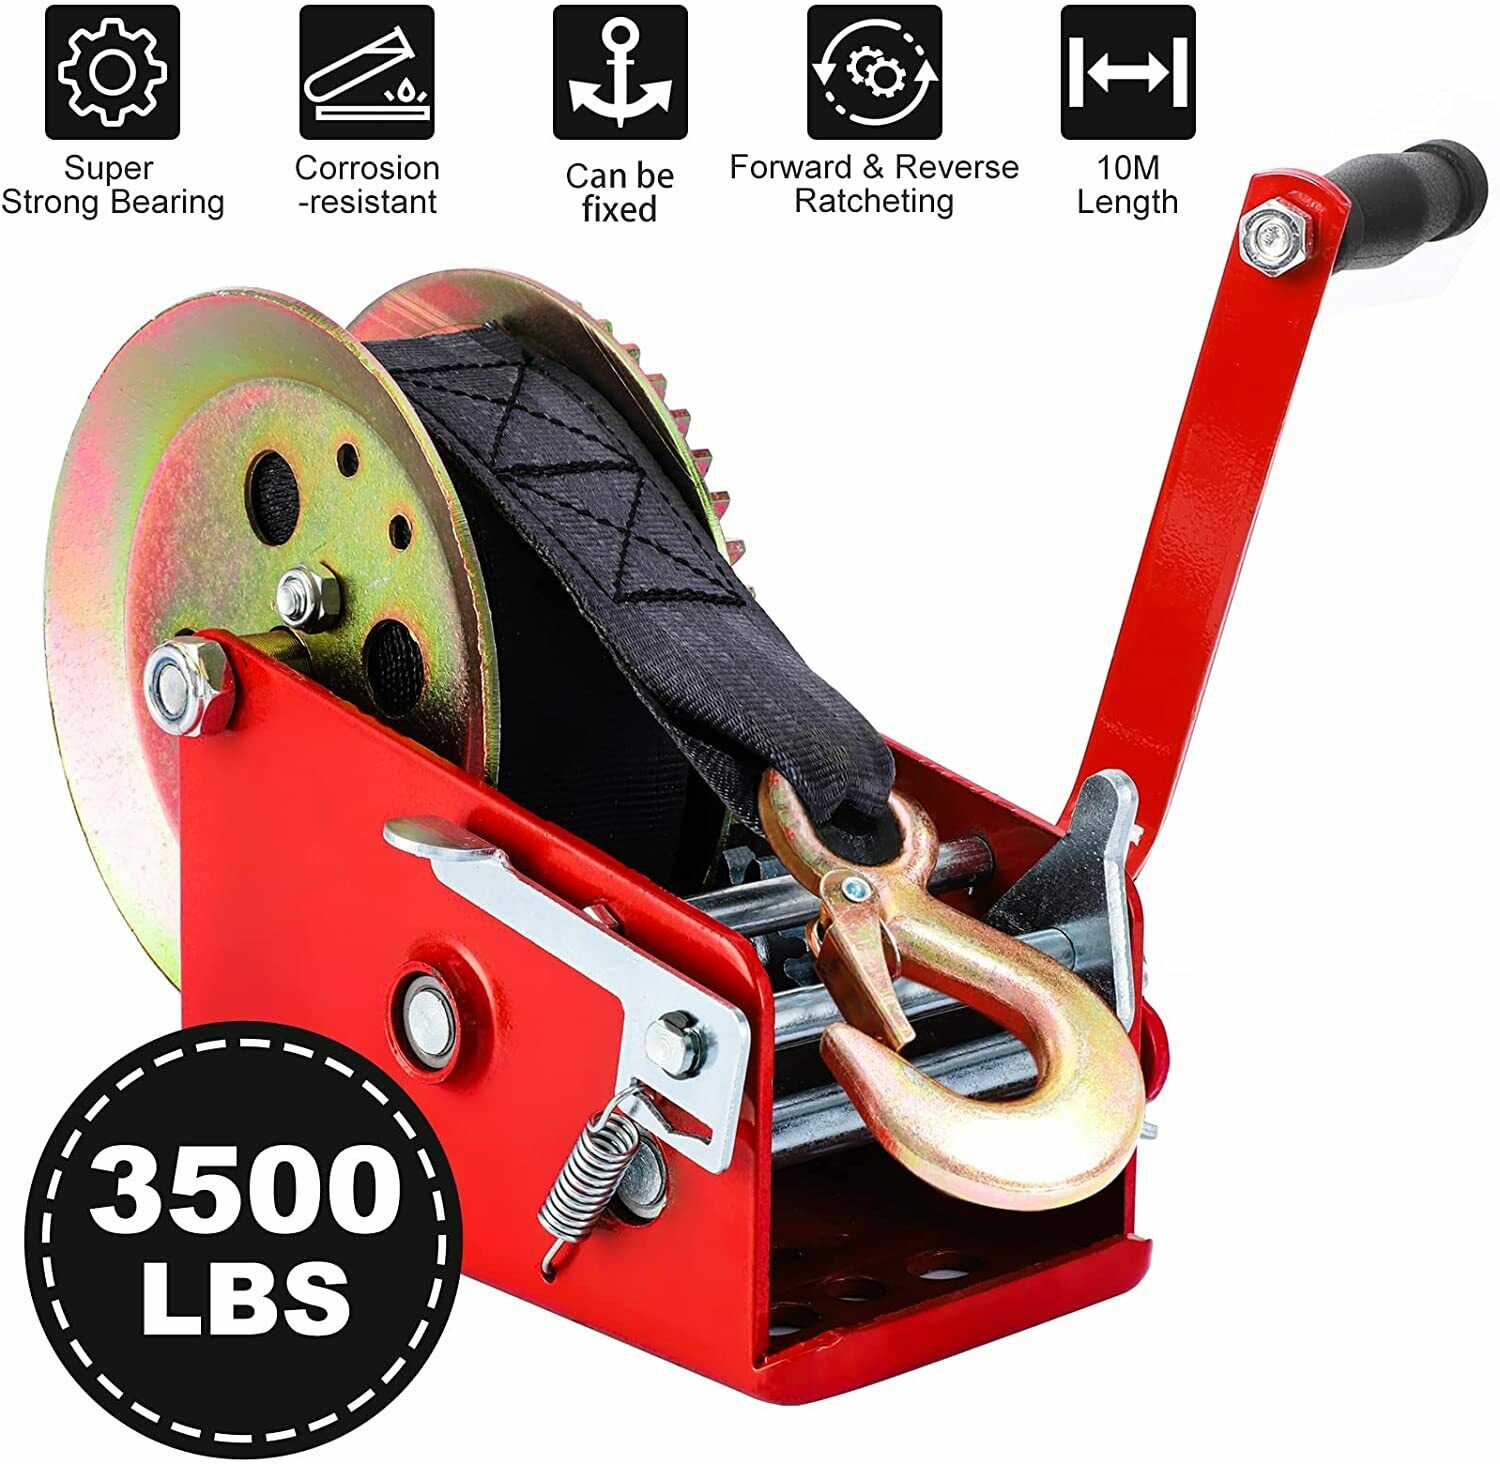 couplet Heavy Duty Hand Winch,Winch Hoist Crane,Manual Lifting Winches for  Boat Trailer ATV or Shop Crane